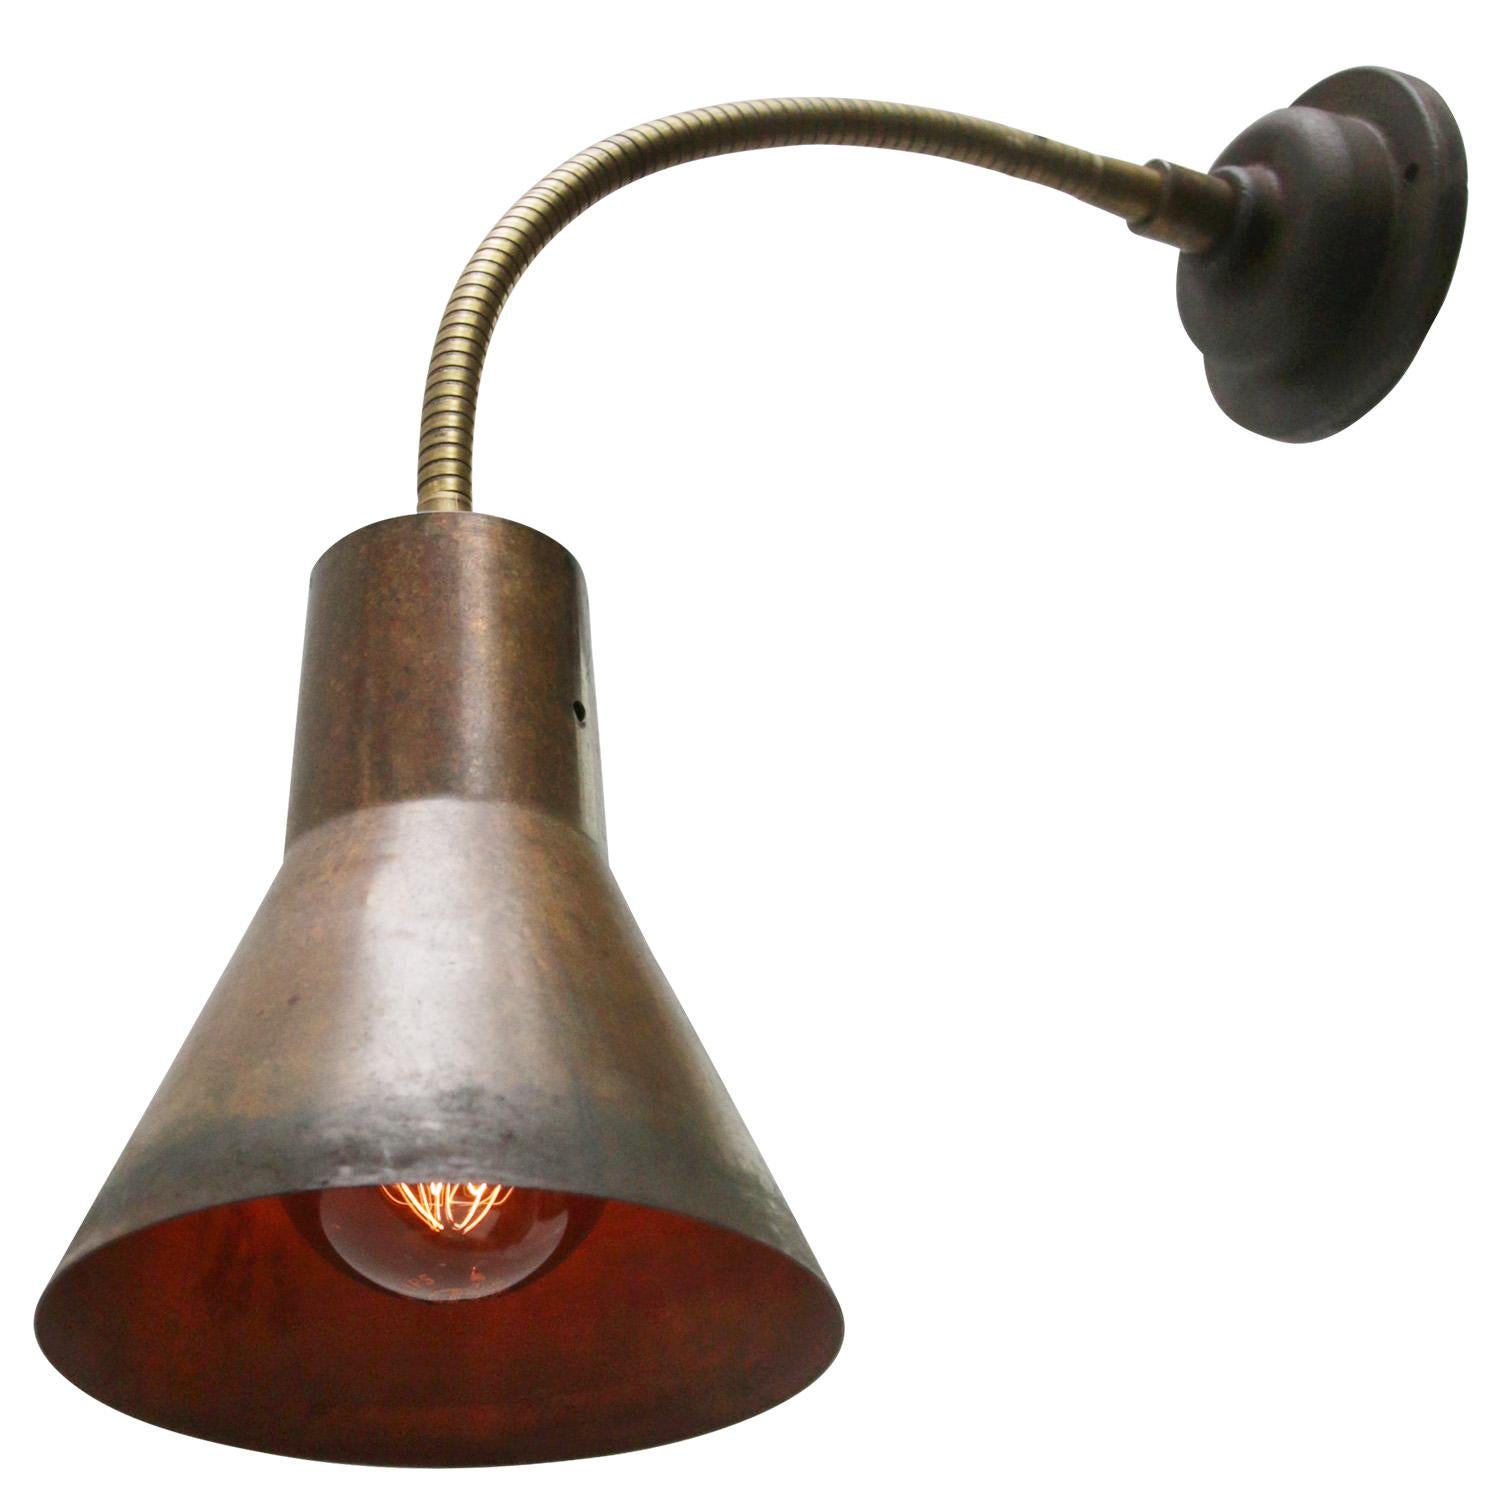 Wall light spot down lighter
Copper shade.
Brass gooseneck arm adjustable in angle.

Diameter cast iron wall mount 10 cm.

Weight: 1.20 kg / 2.6 lb

Priced per individual item. All lamps have been made suitable by international standards for